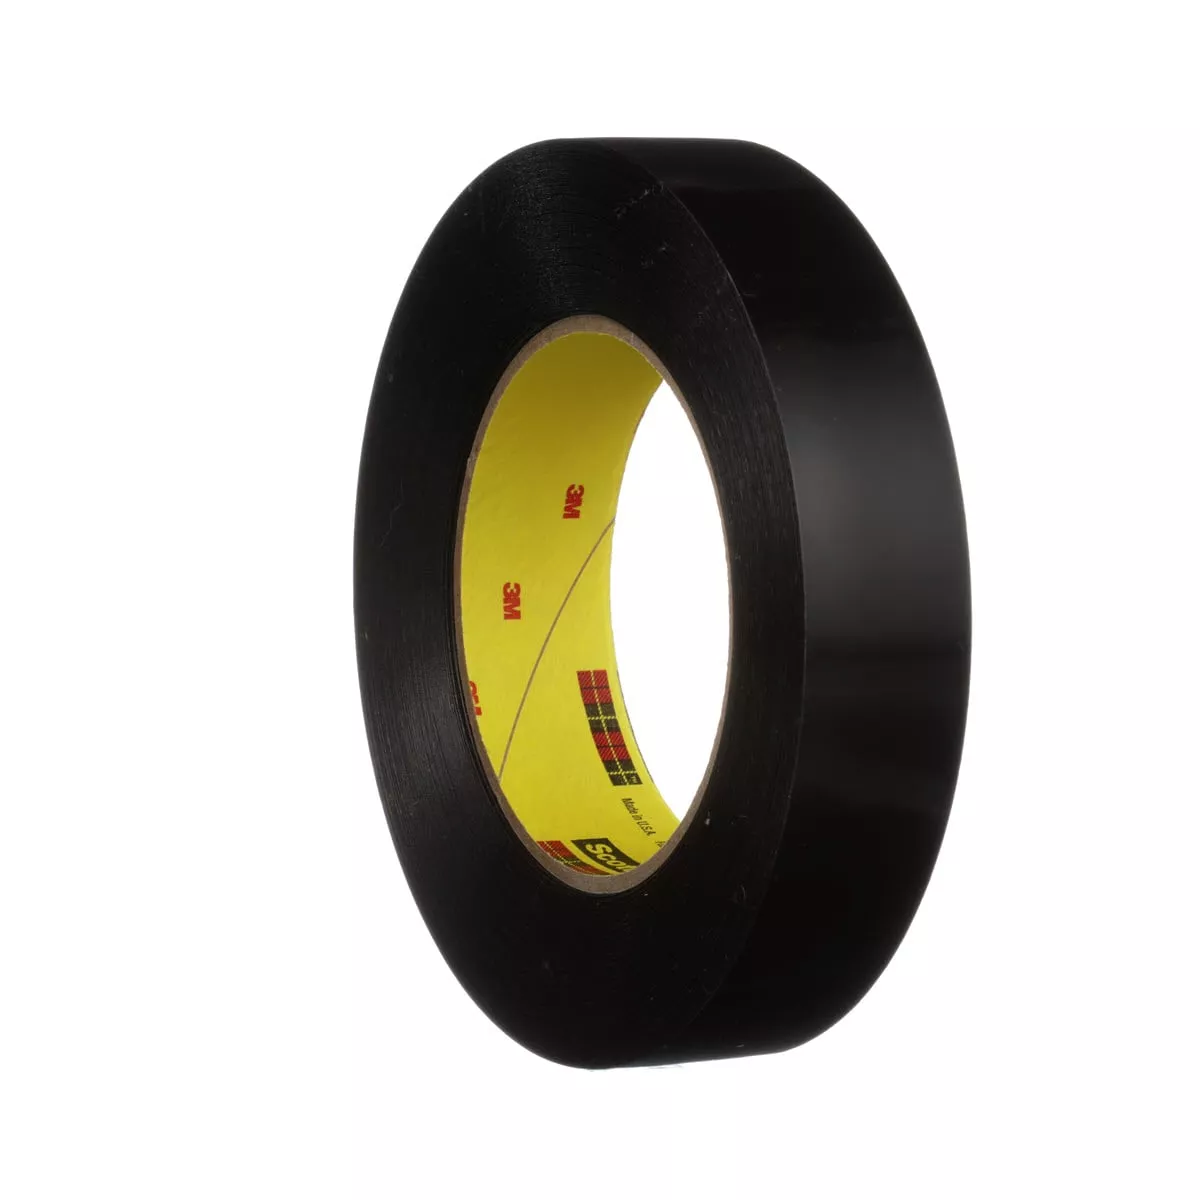 3M™ Preservation Sealing Tape 481, Black, 2 in x 36 yd, 9.5 mil, 24
Roll/Case